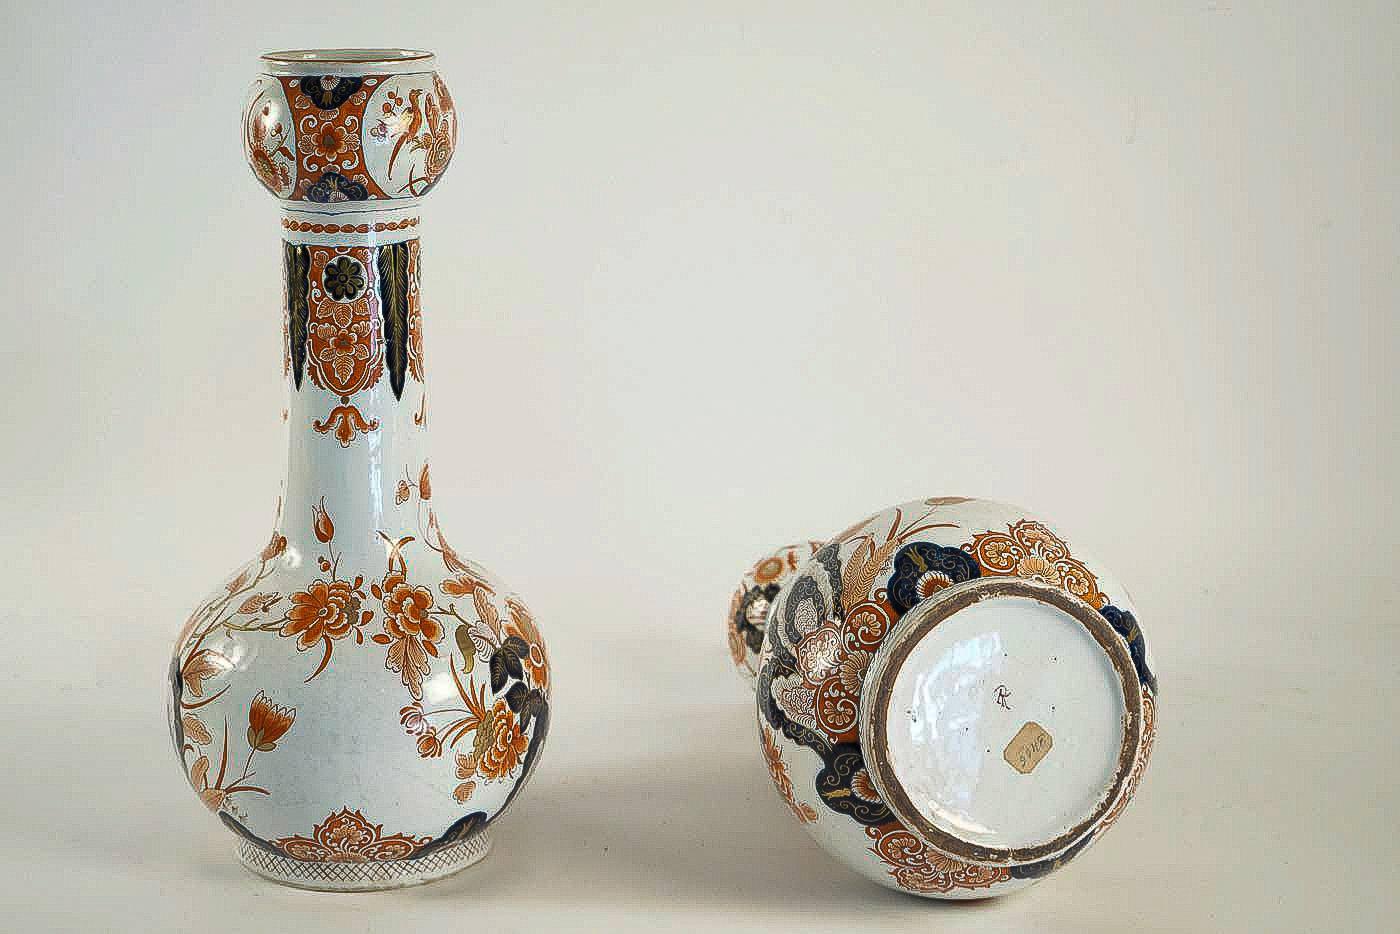 Dutch Late 18th Century, Polychrome Delft Faience Pair of Gourd-Shaped Vases 7